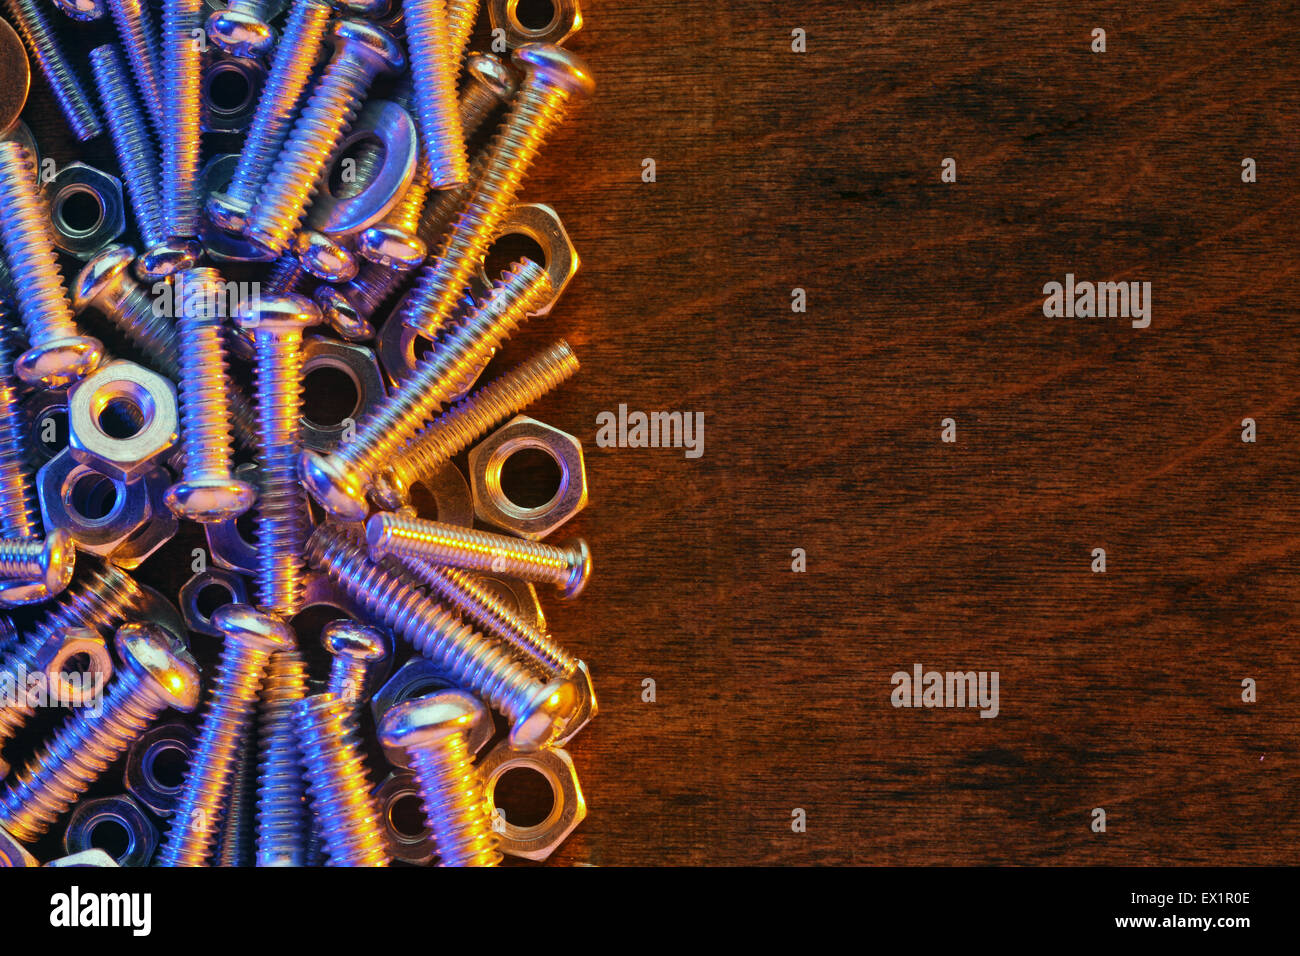 Nuts and bolts background Stock Photo